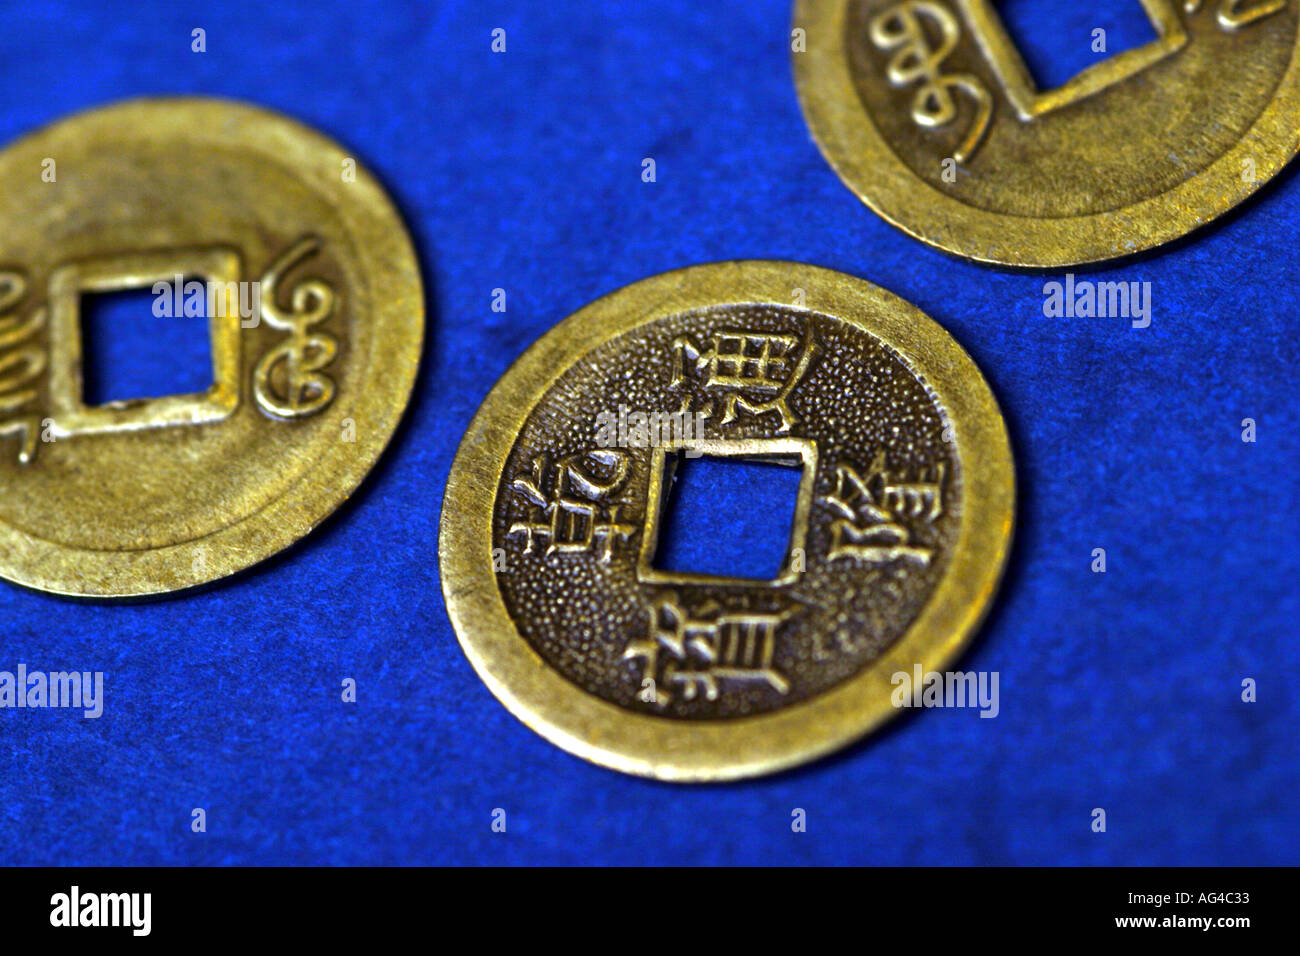 3 I ching coins on a blue background Stock Photo